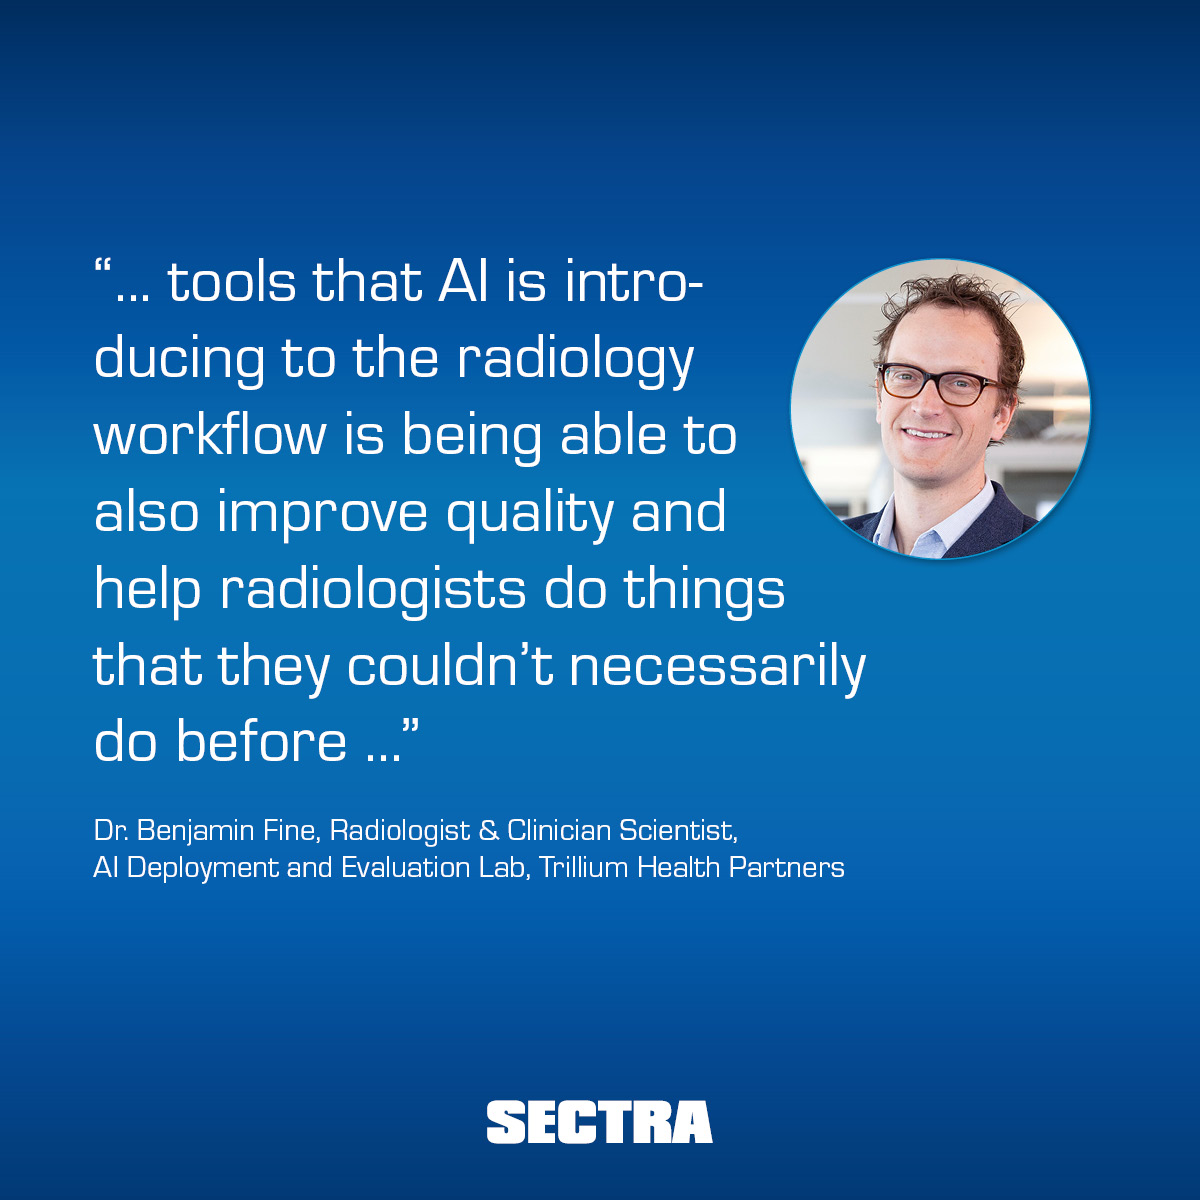 Listen to “5 ways AI can change radiology imaging” to learn how AI can help radiologists tackle rising imaging volumes while also dealing with staffing shortages caused by retirement, burnout, and pandemic-related stress: bit.ly/3EEuEtM
 
#RSNA22 #AI #radiology